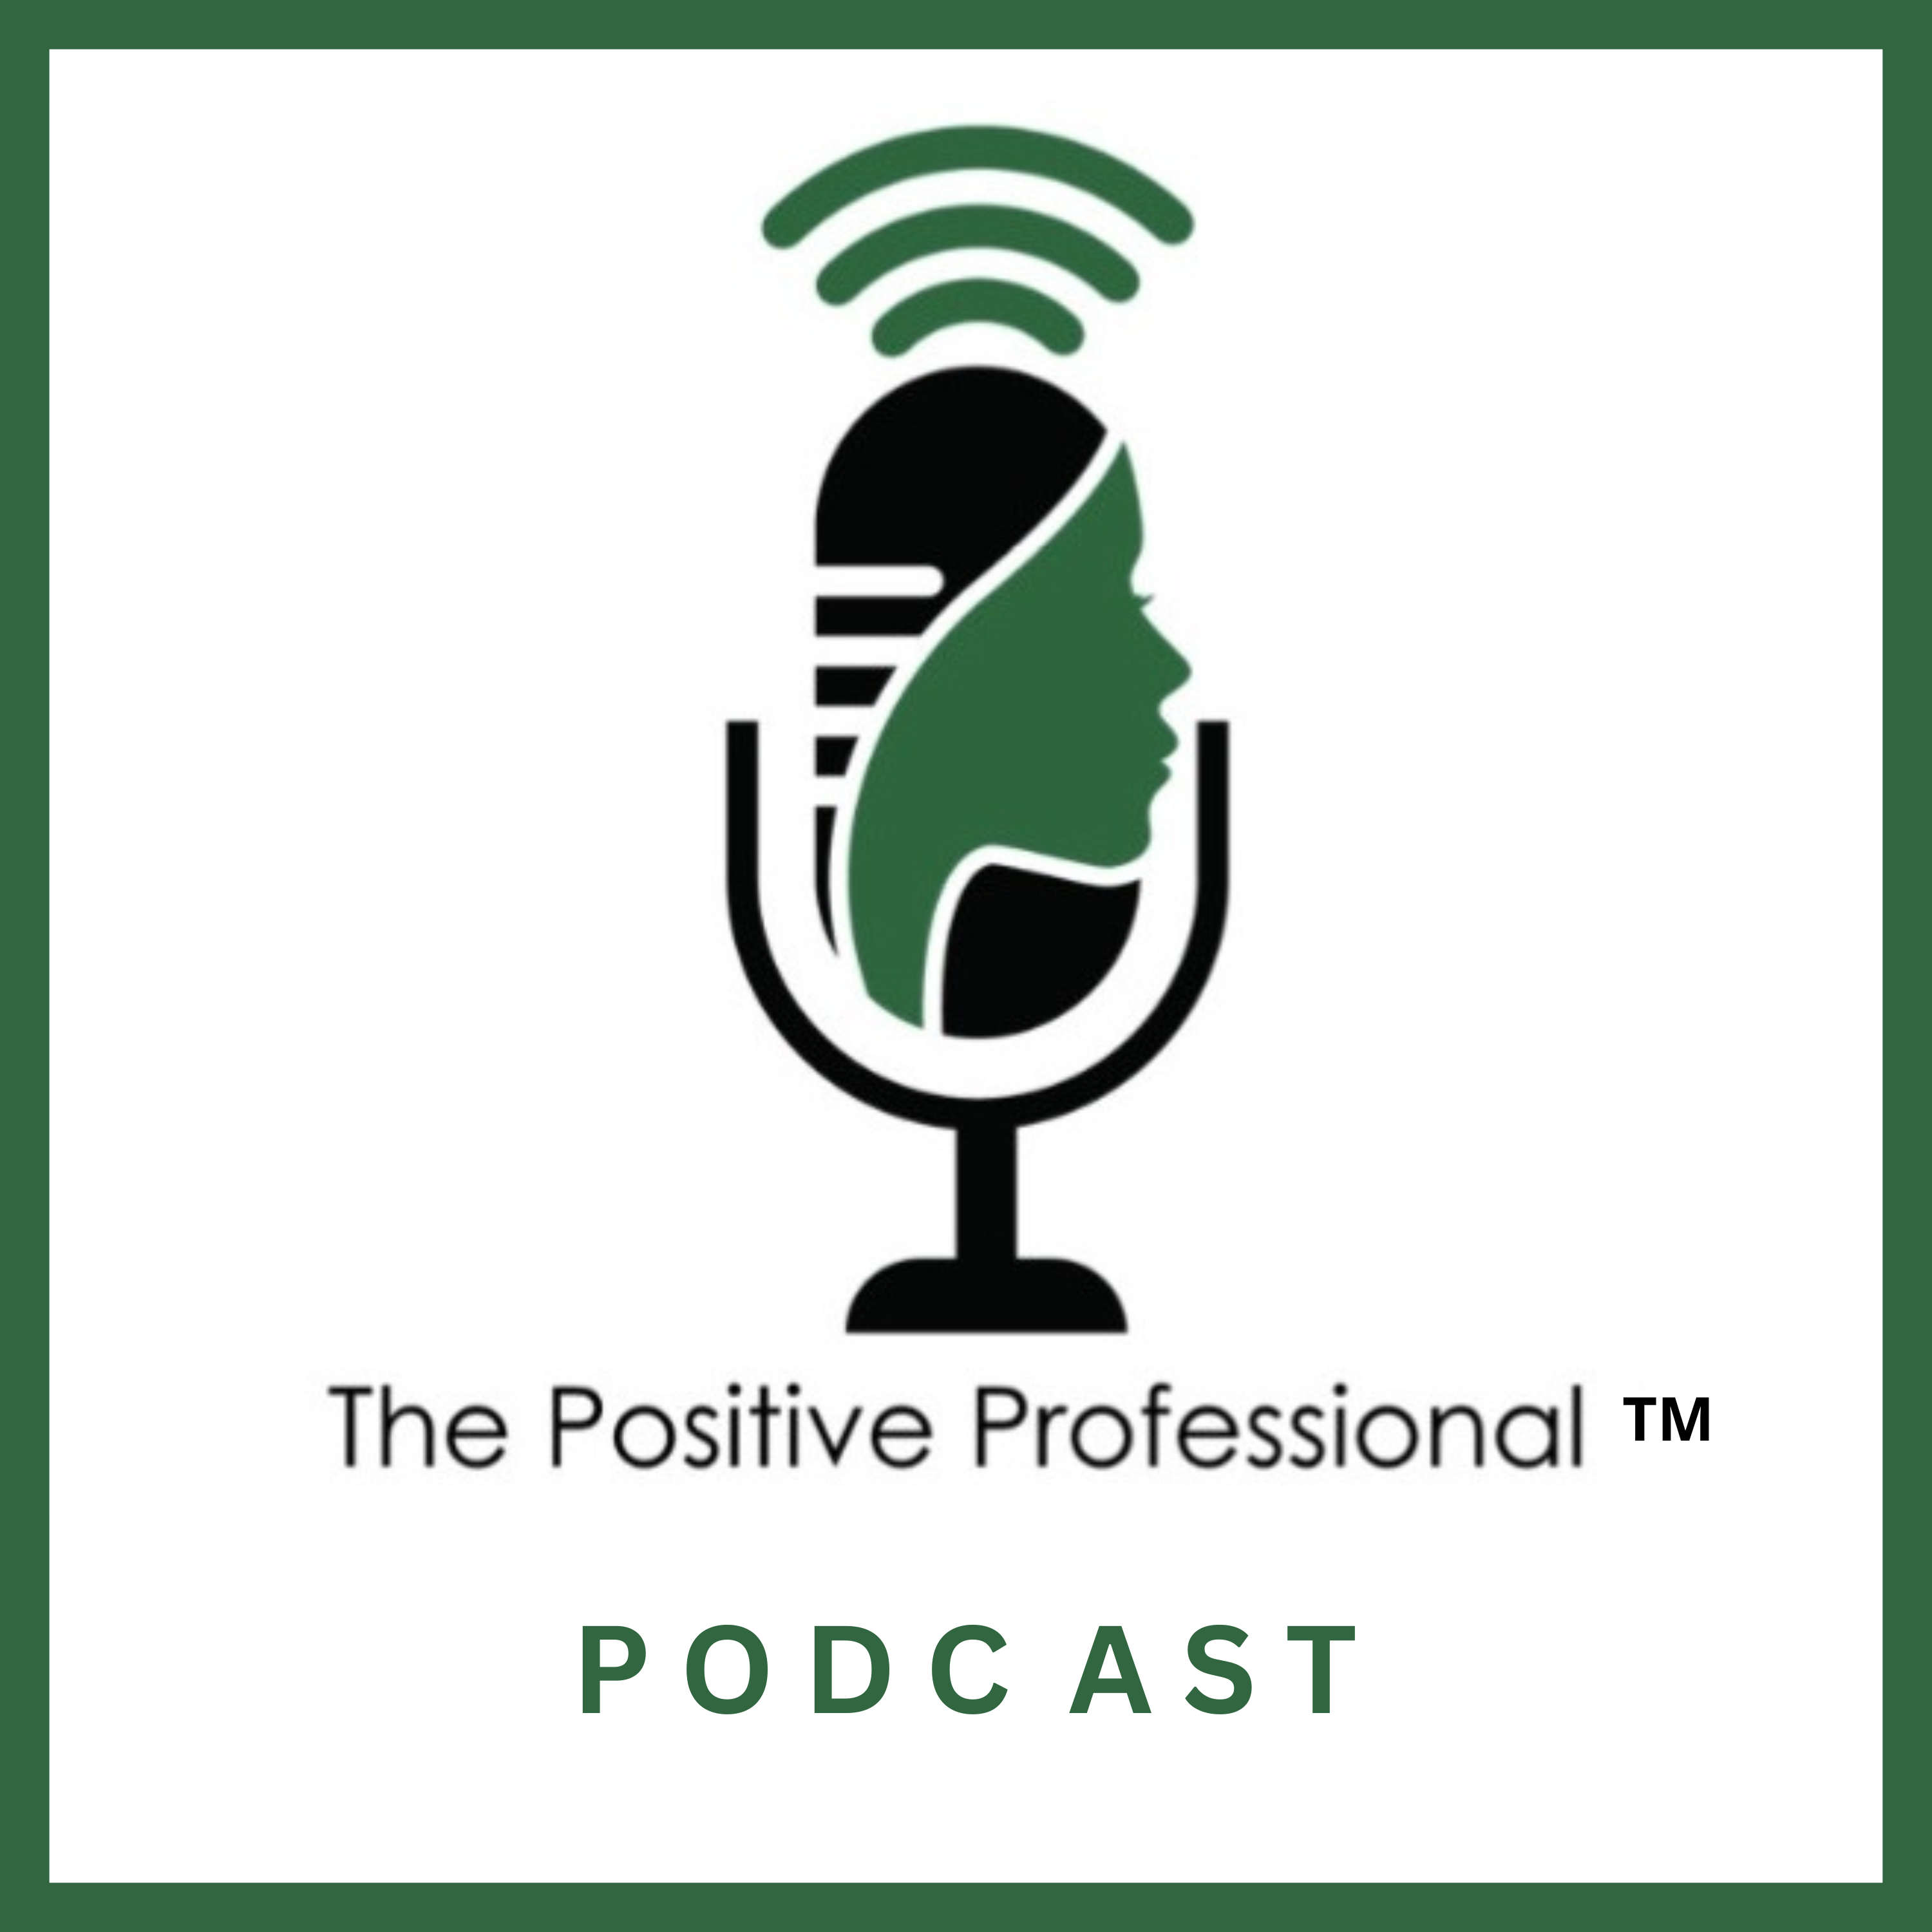 Season 4 Episode 36  "Keeping Your Mental Health Strong During the Holidays"